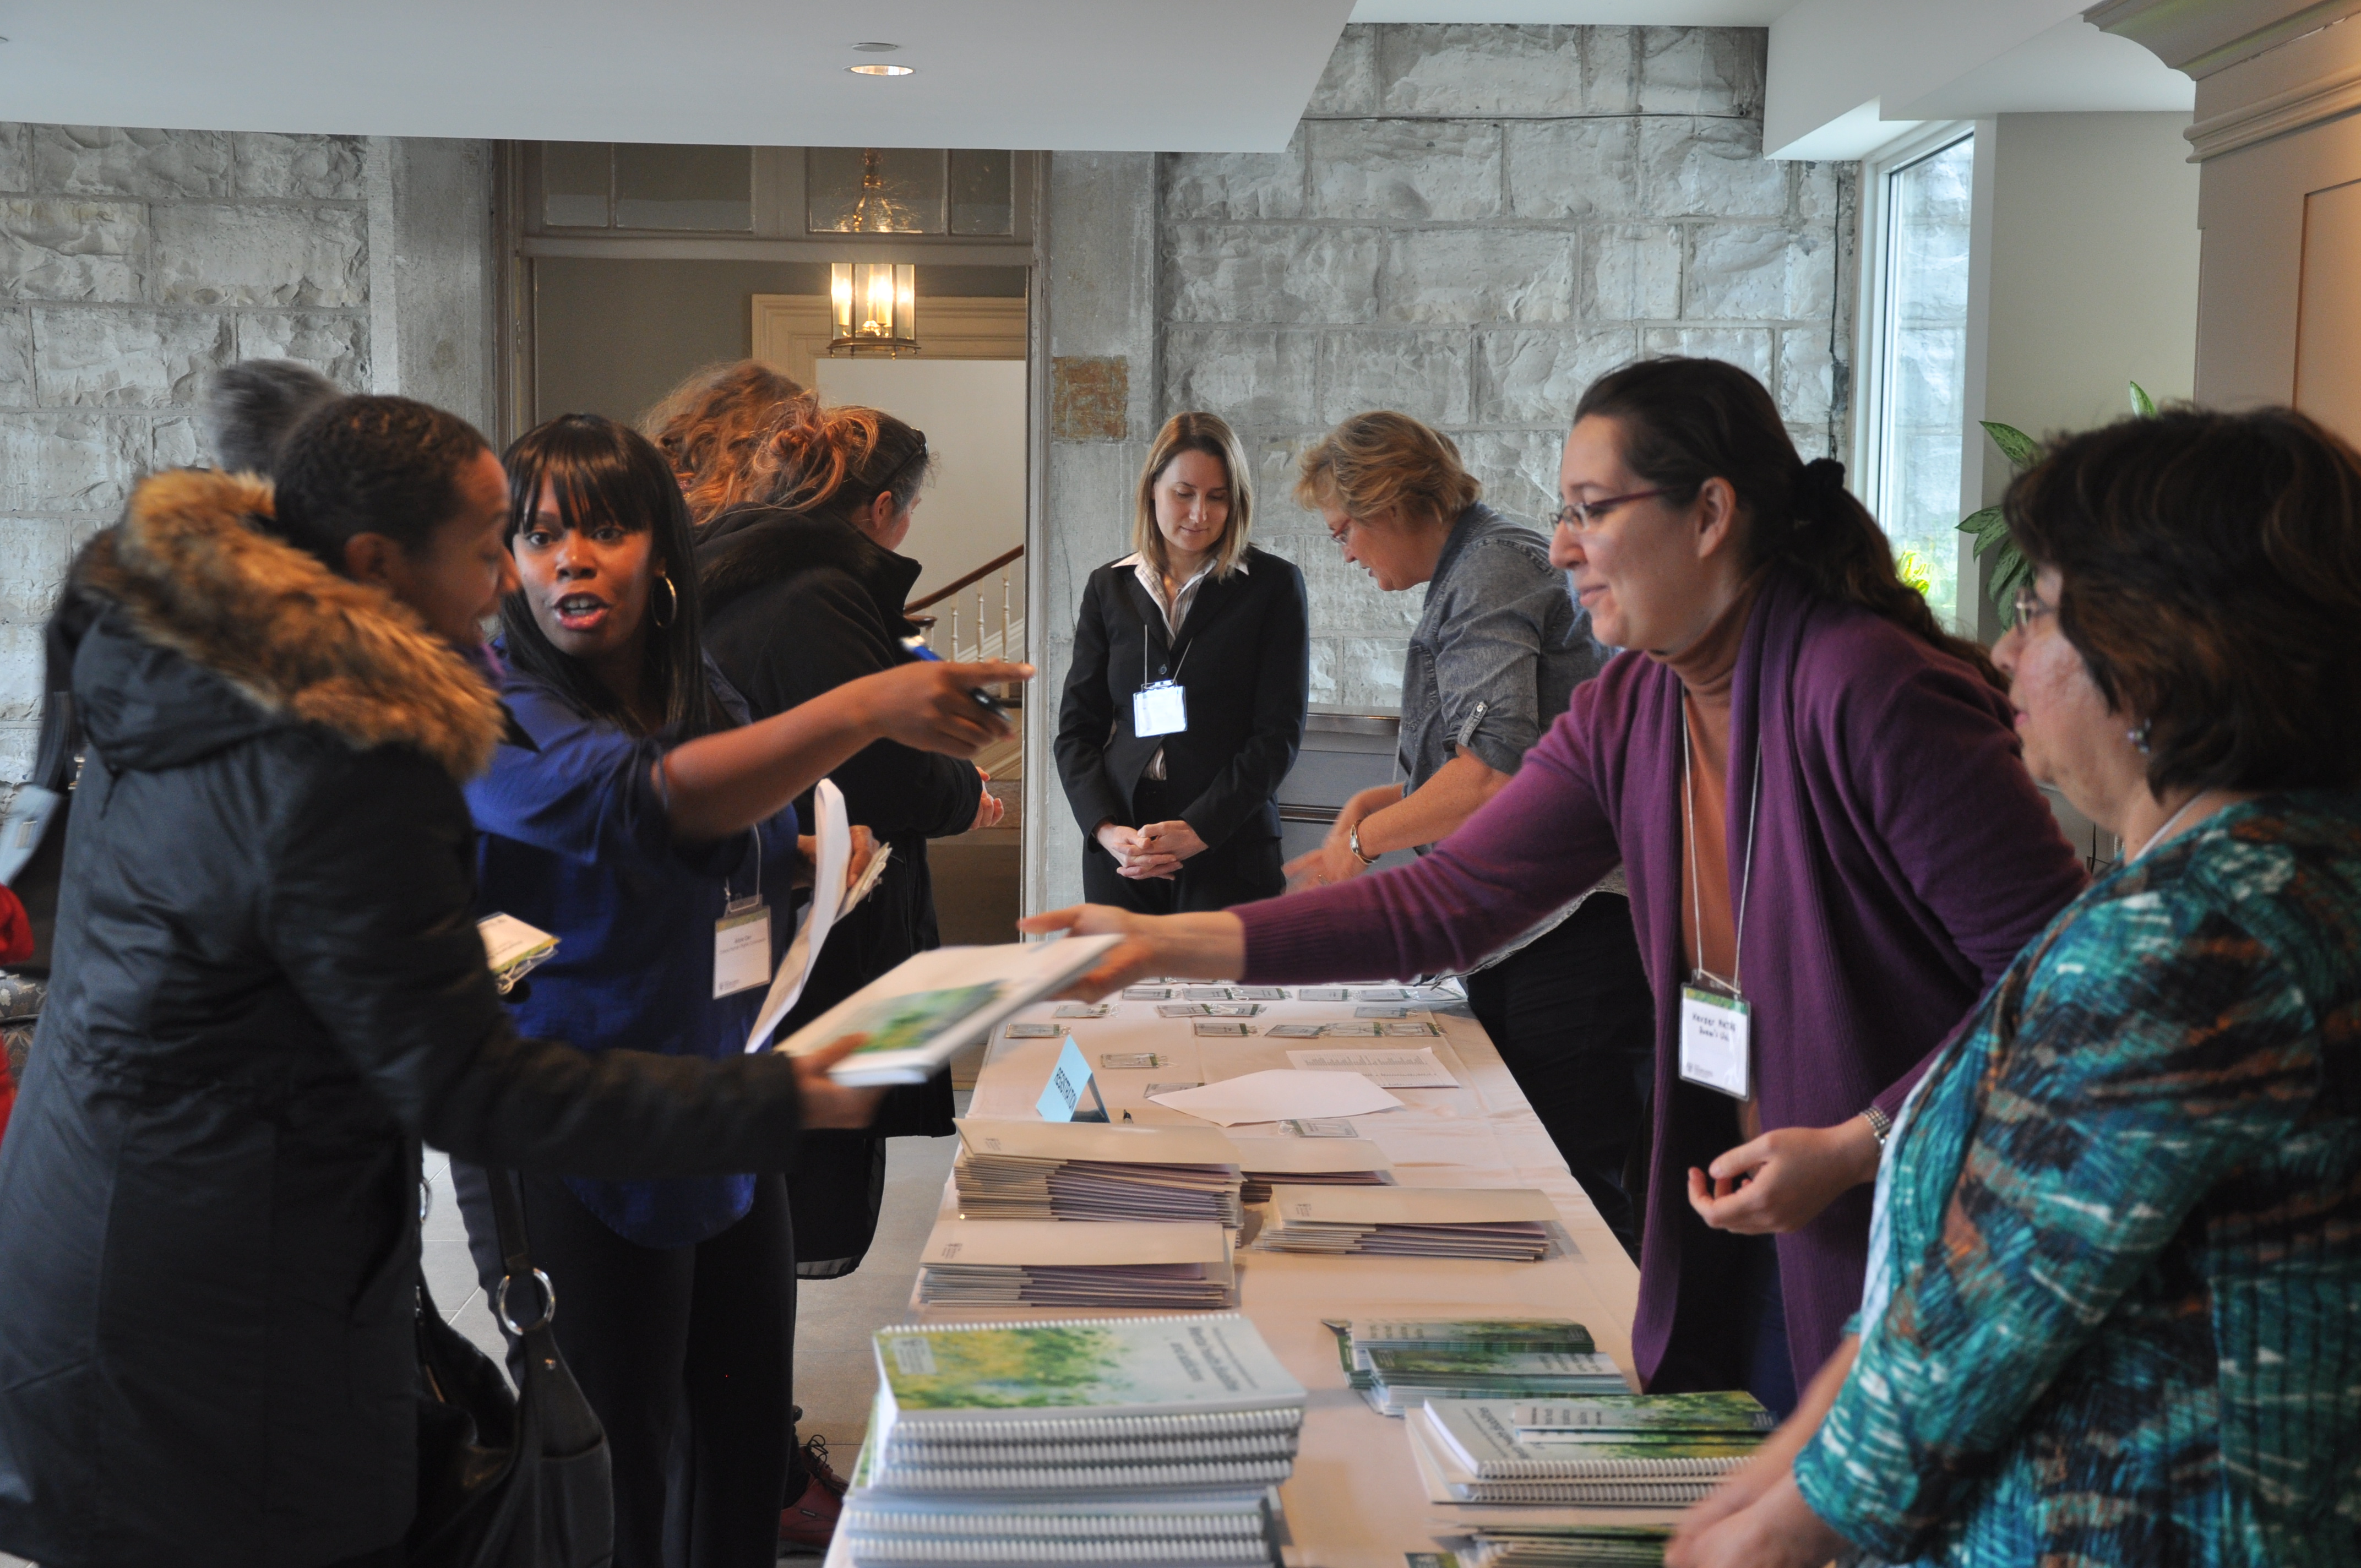 OHRC staff stand at a resource table handing out copies of the mental health policy and speaking with event attendees.